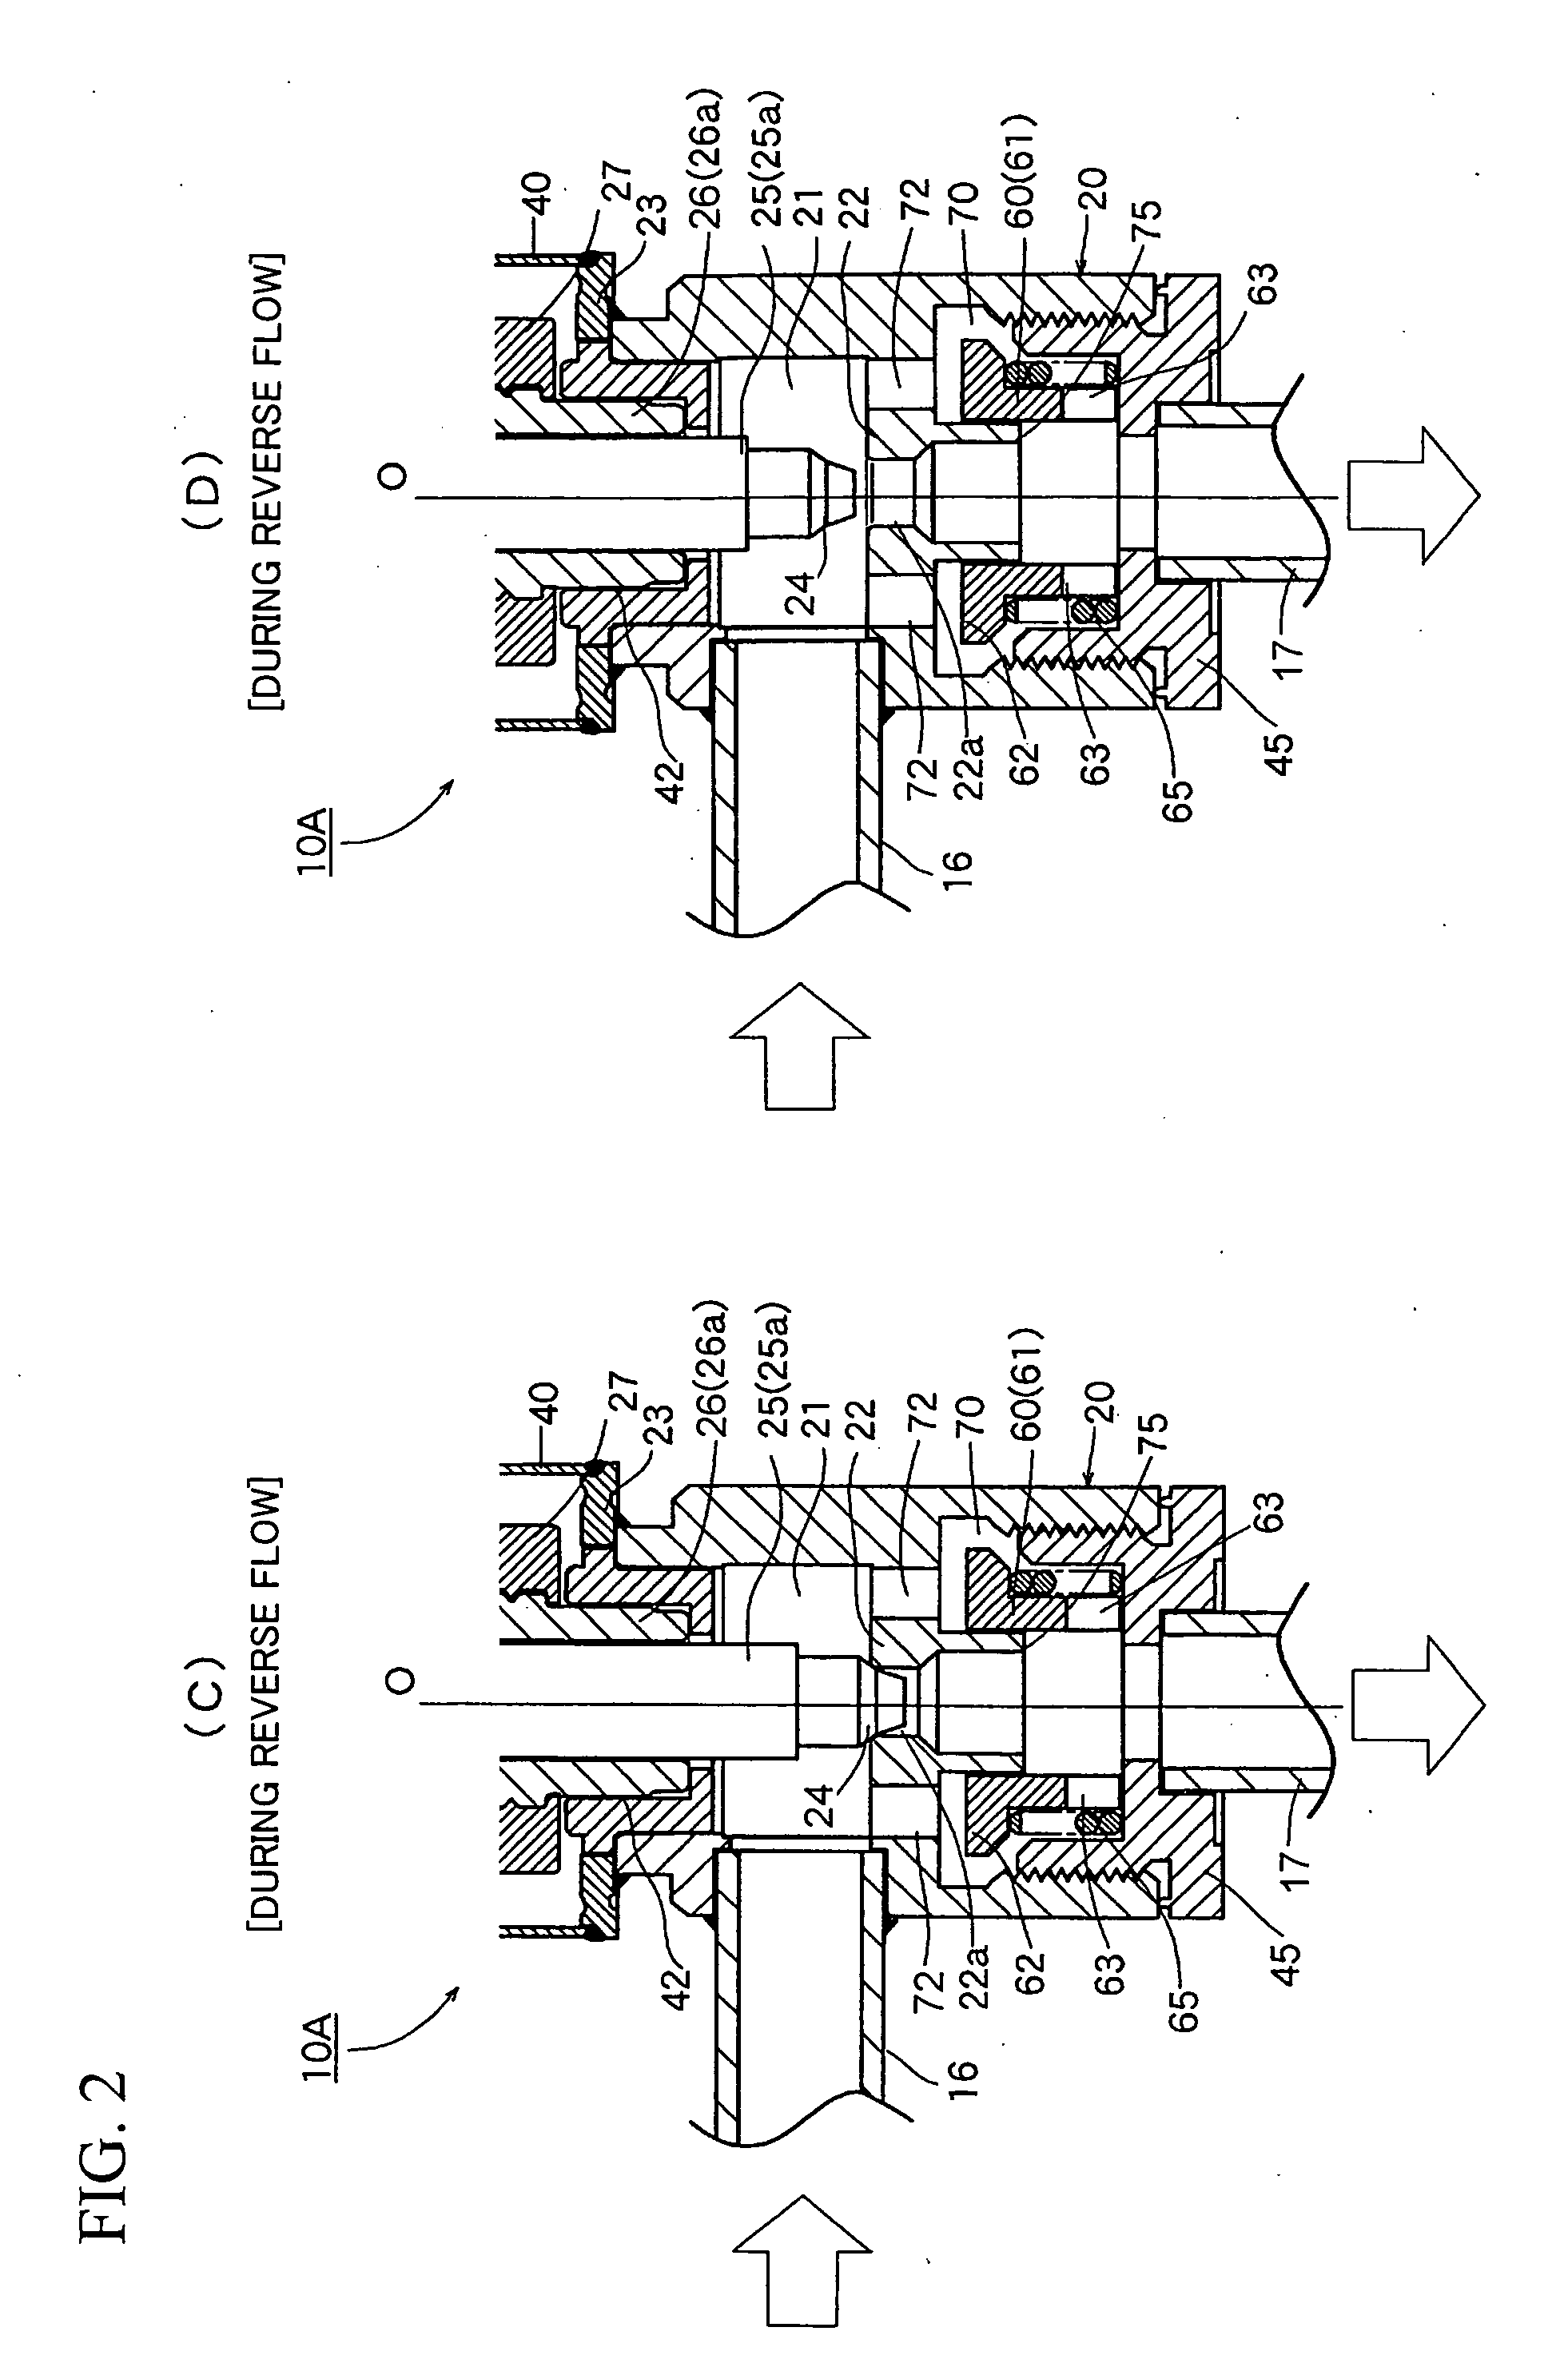 Motor-operated valve and refrigeration cycle using the same